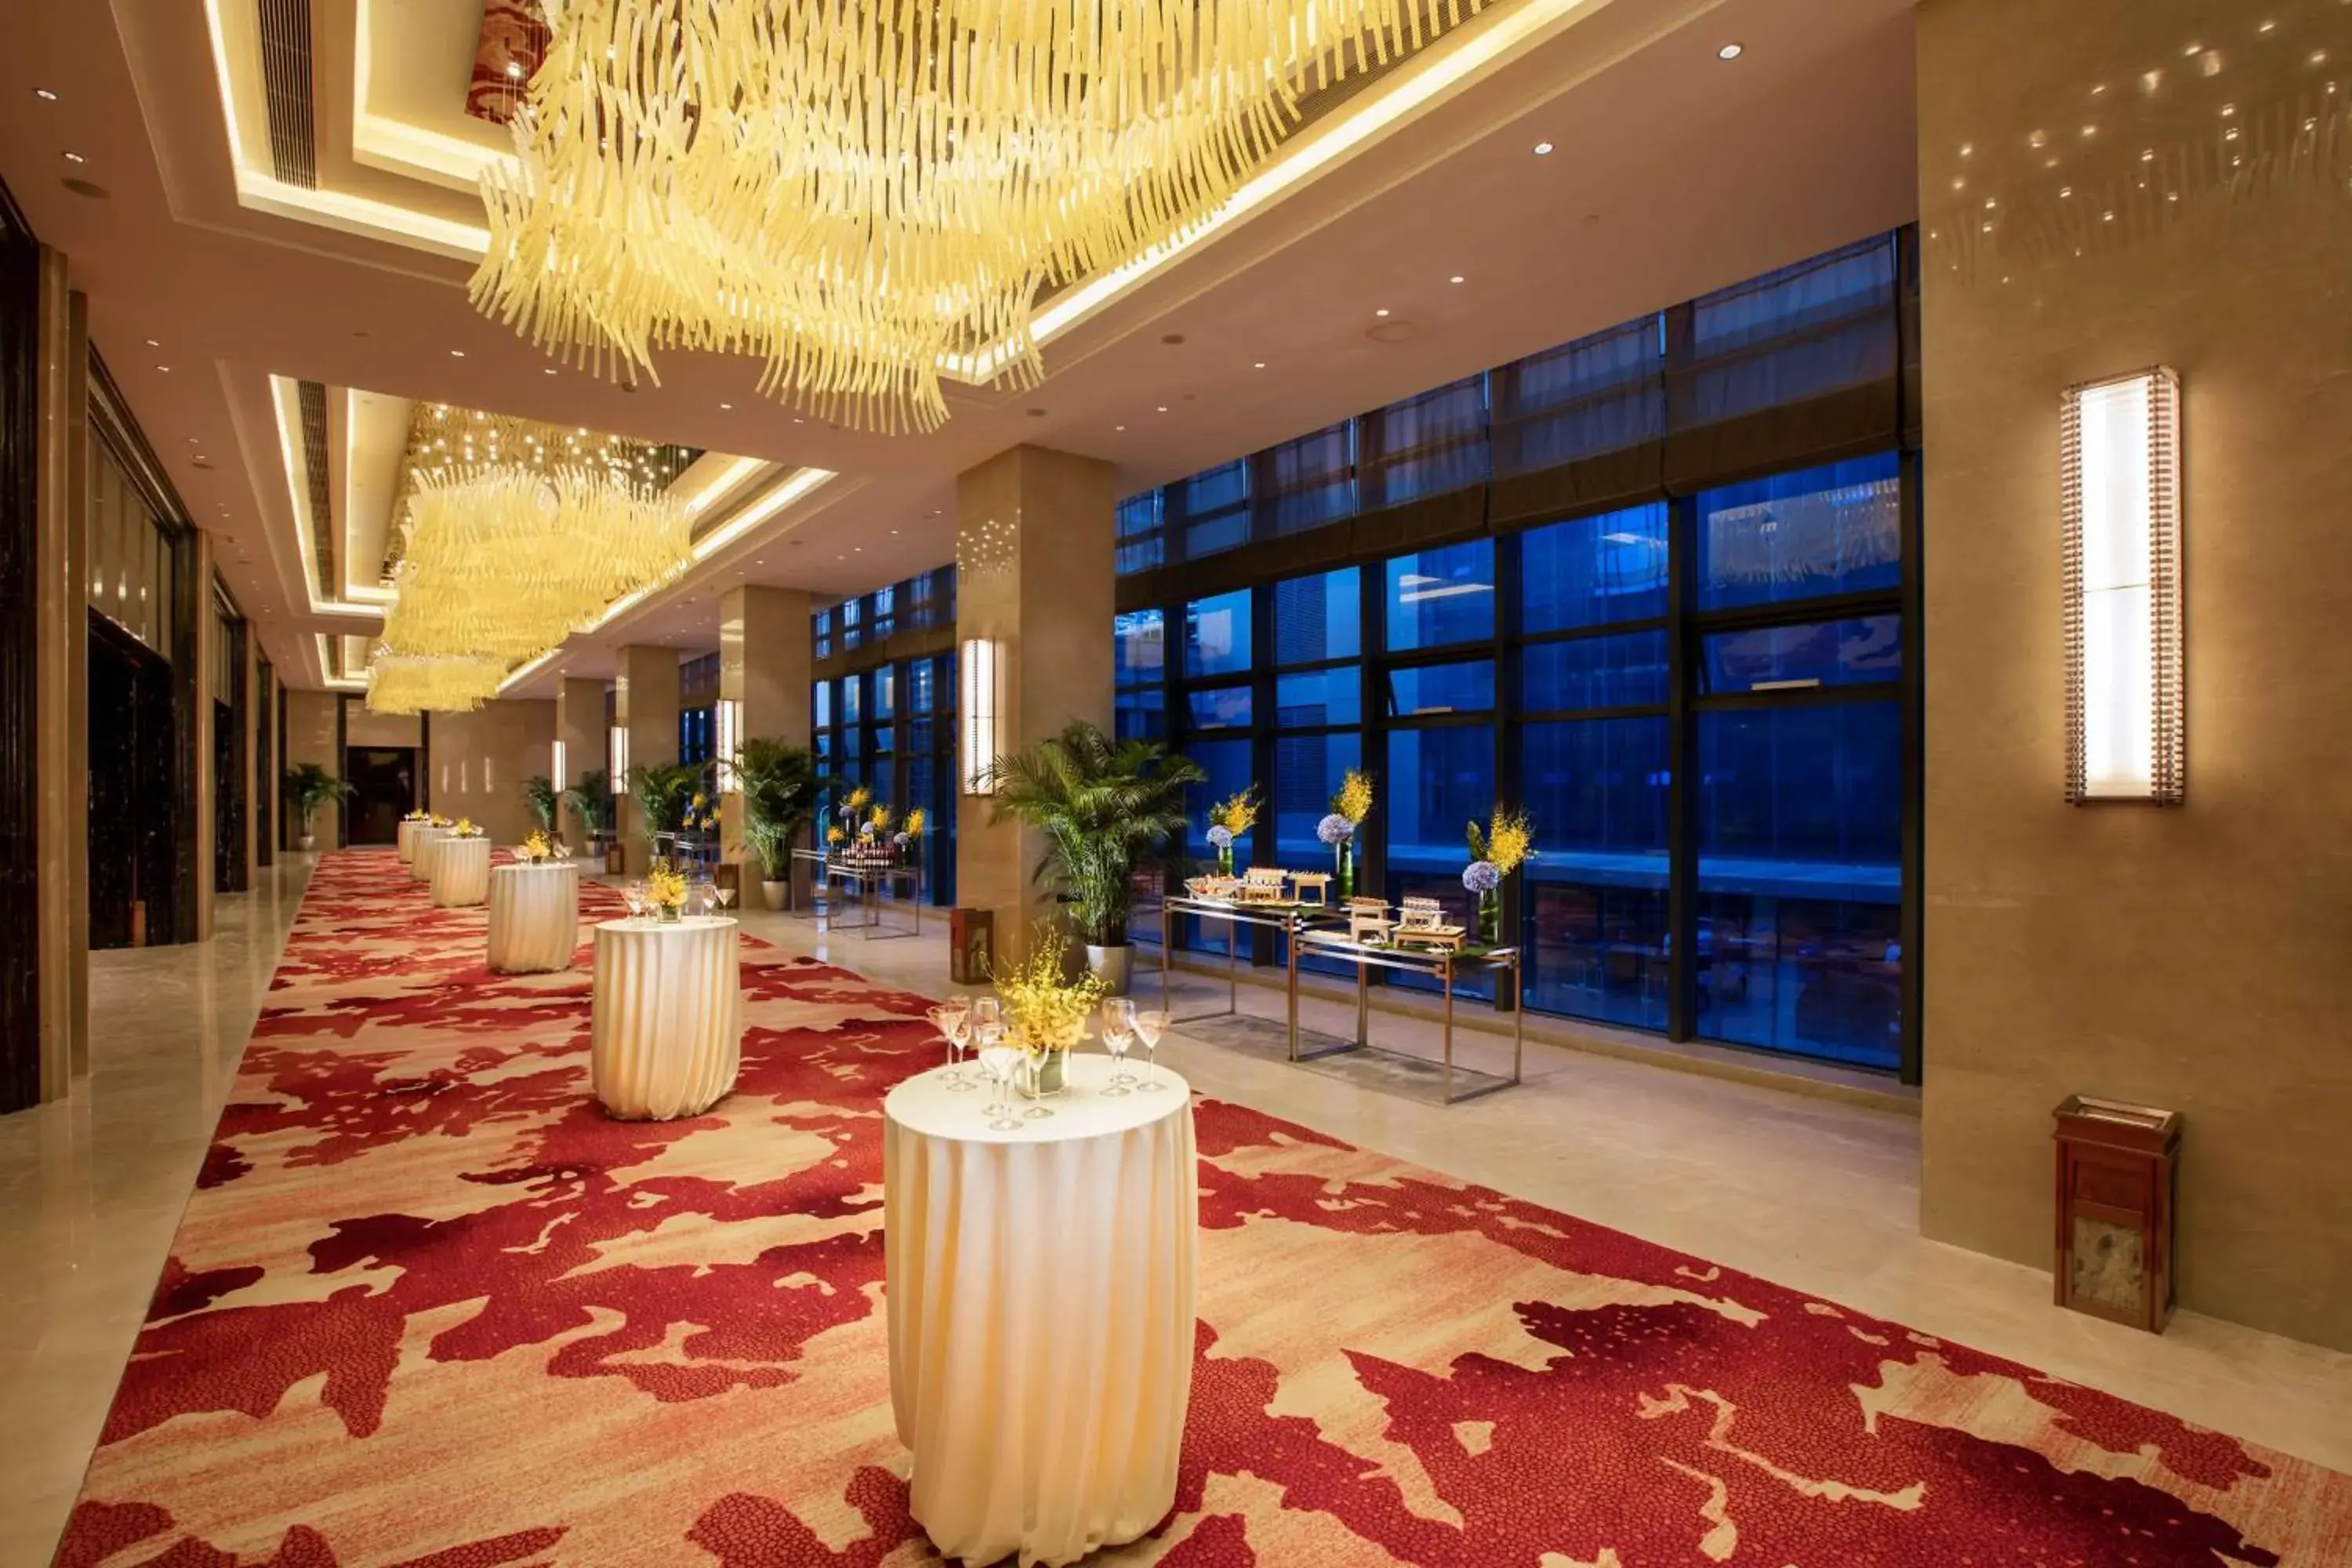 Meeting/conference room in Hilton Wuhan Riverside